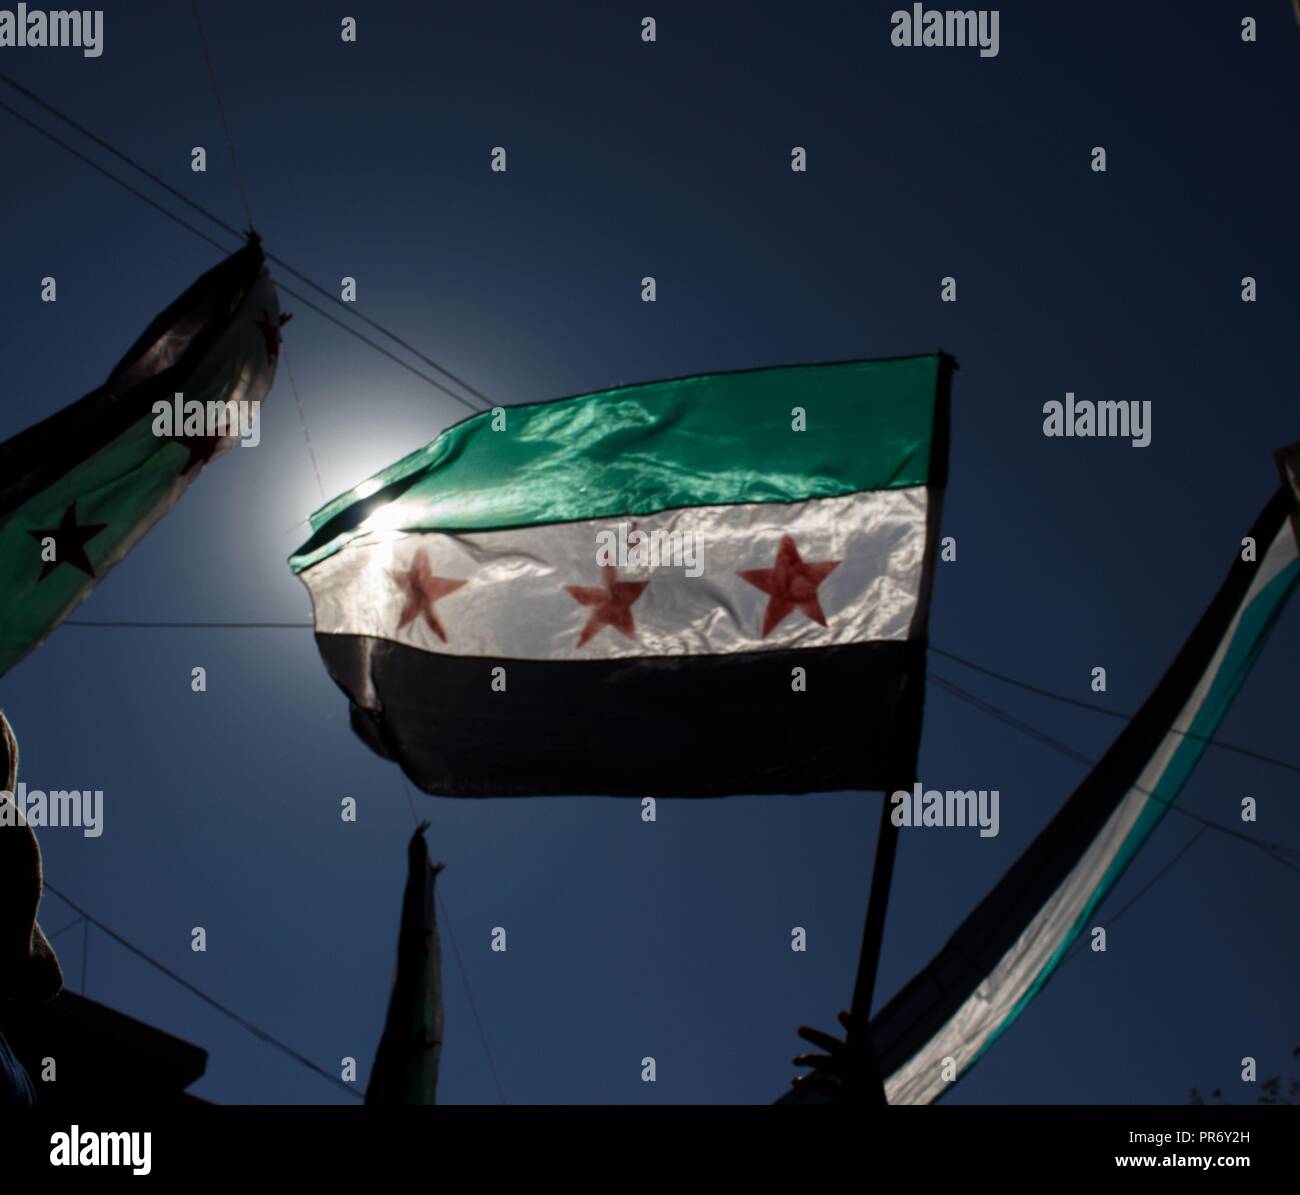 A flag seen being raised during a protest in the town of Eriha in Idlib calling for the release of detainees held by the Syrian regime. Stock Photo